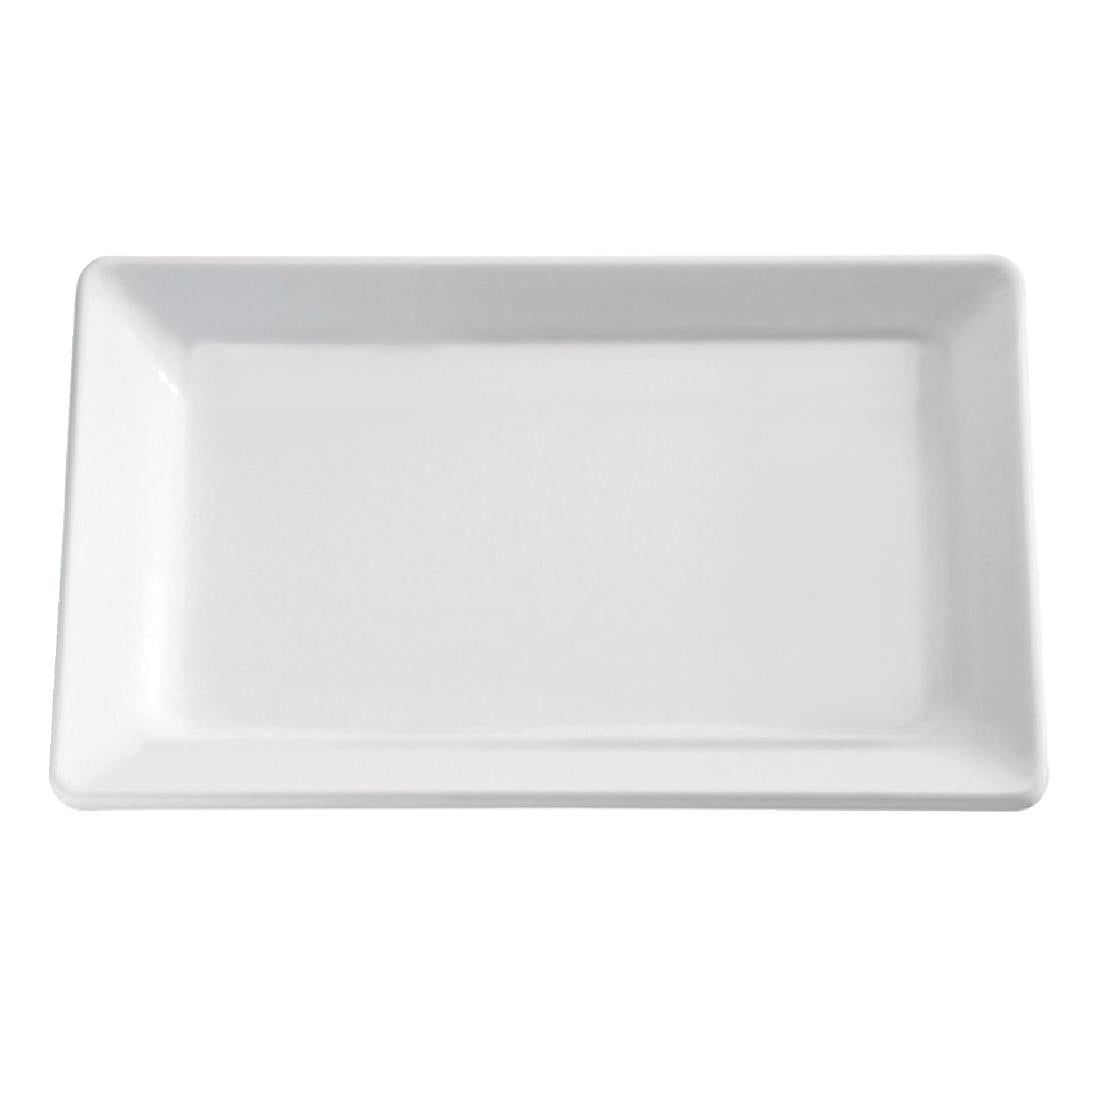 GF124 APS Pure Melamine Tray White GN 1/3 JD Catering Equipment Solutions Ltd